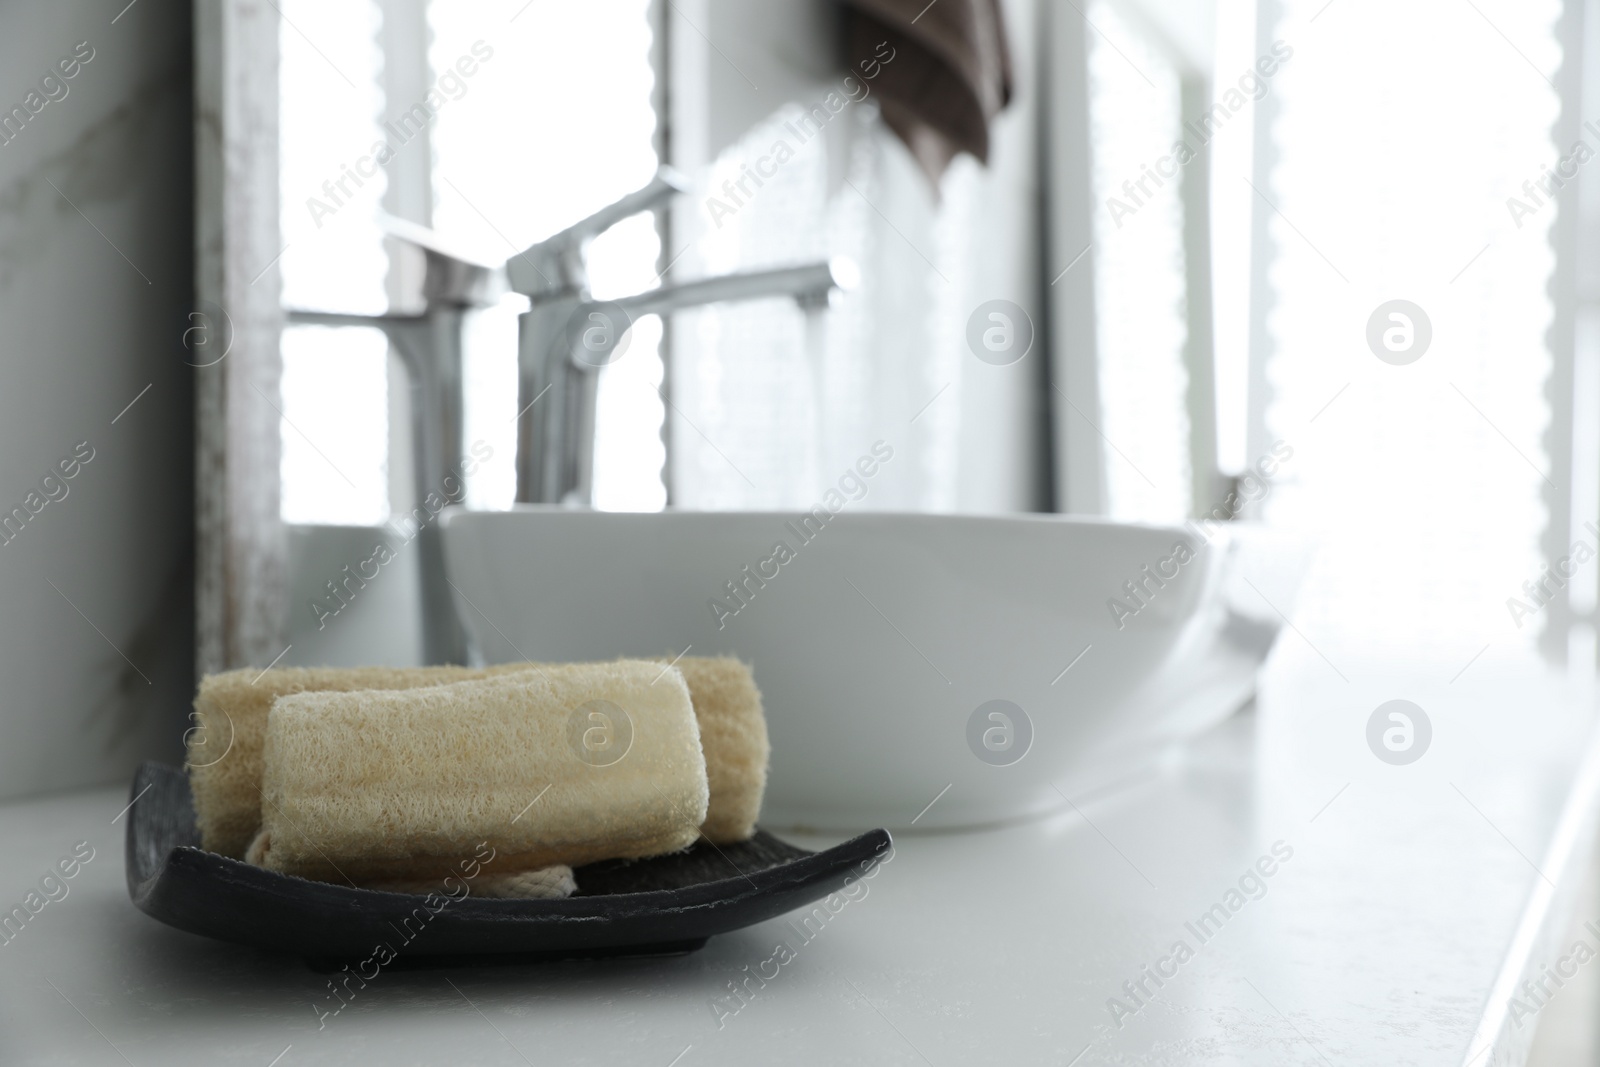 Photo of Loofah sponges on table in bathroom. Space for text